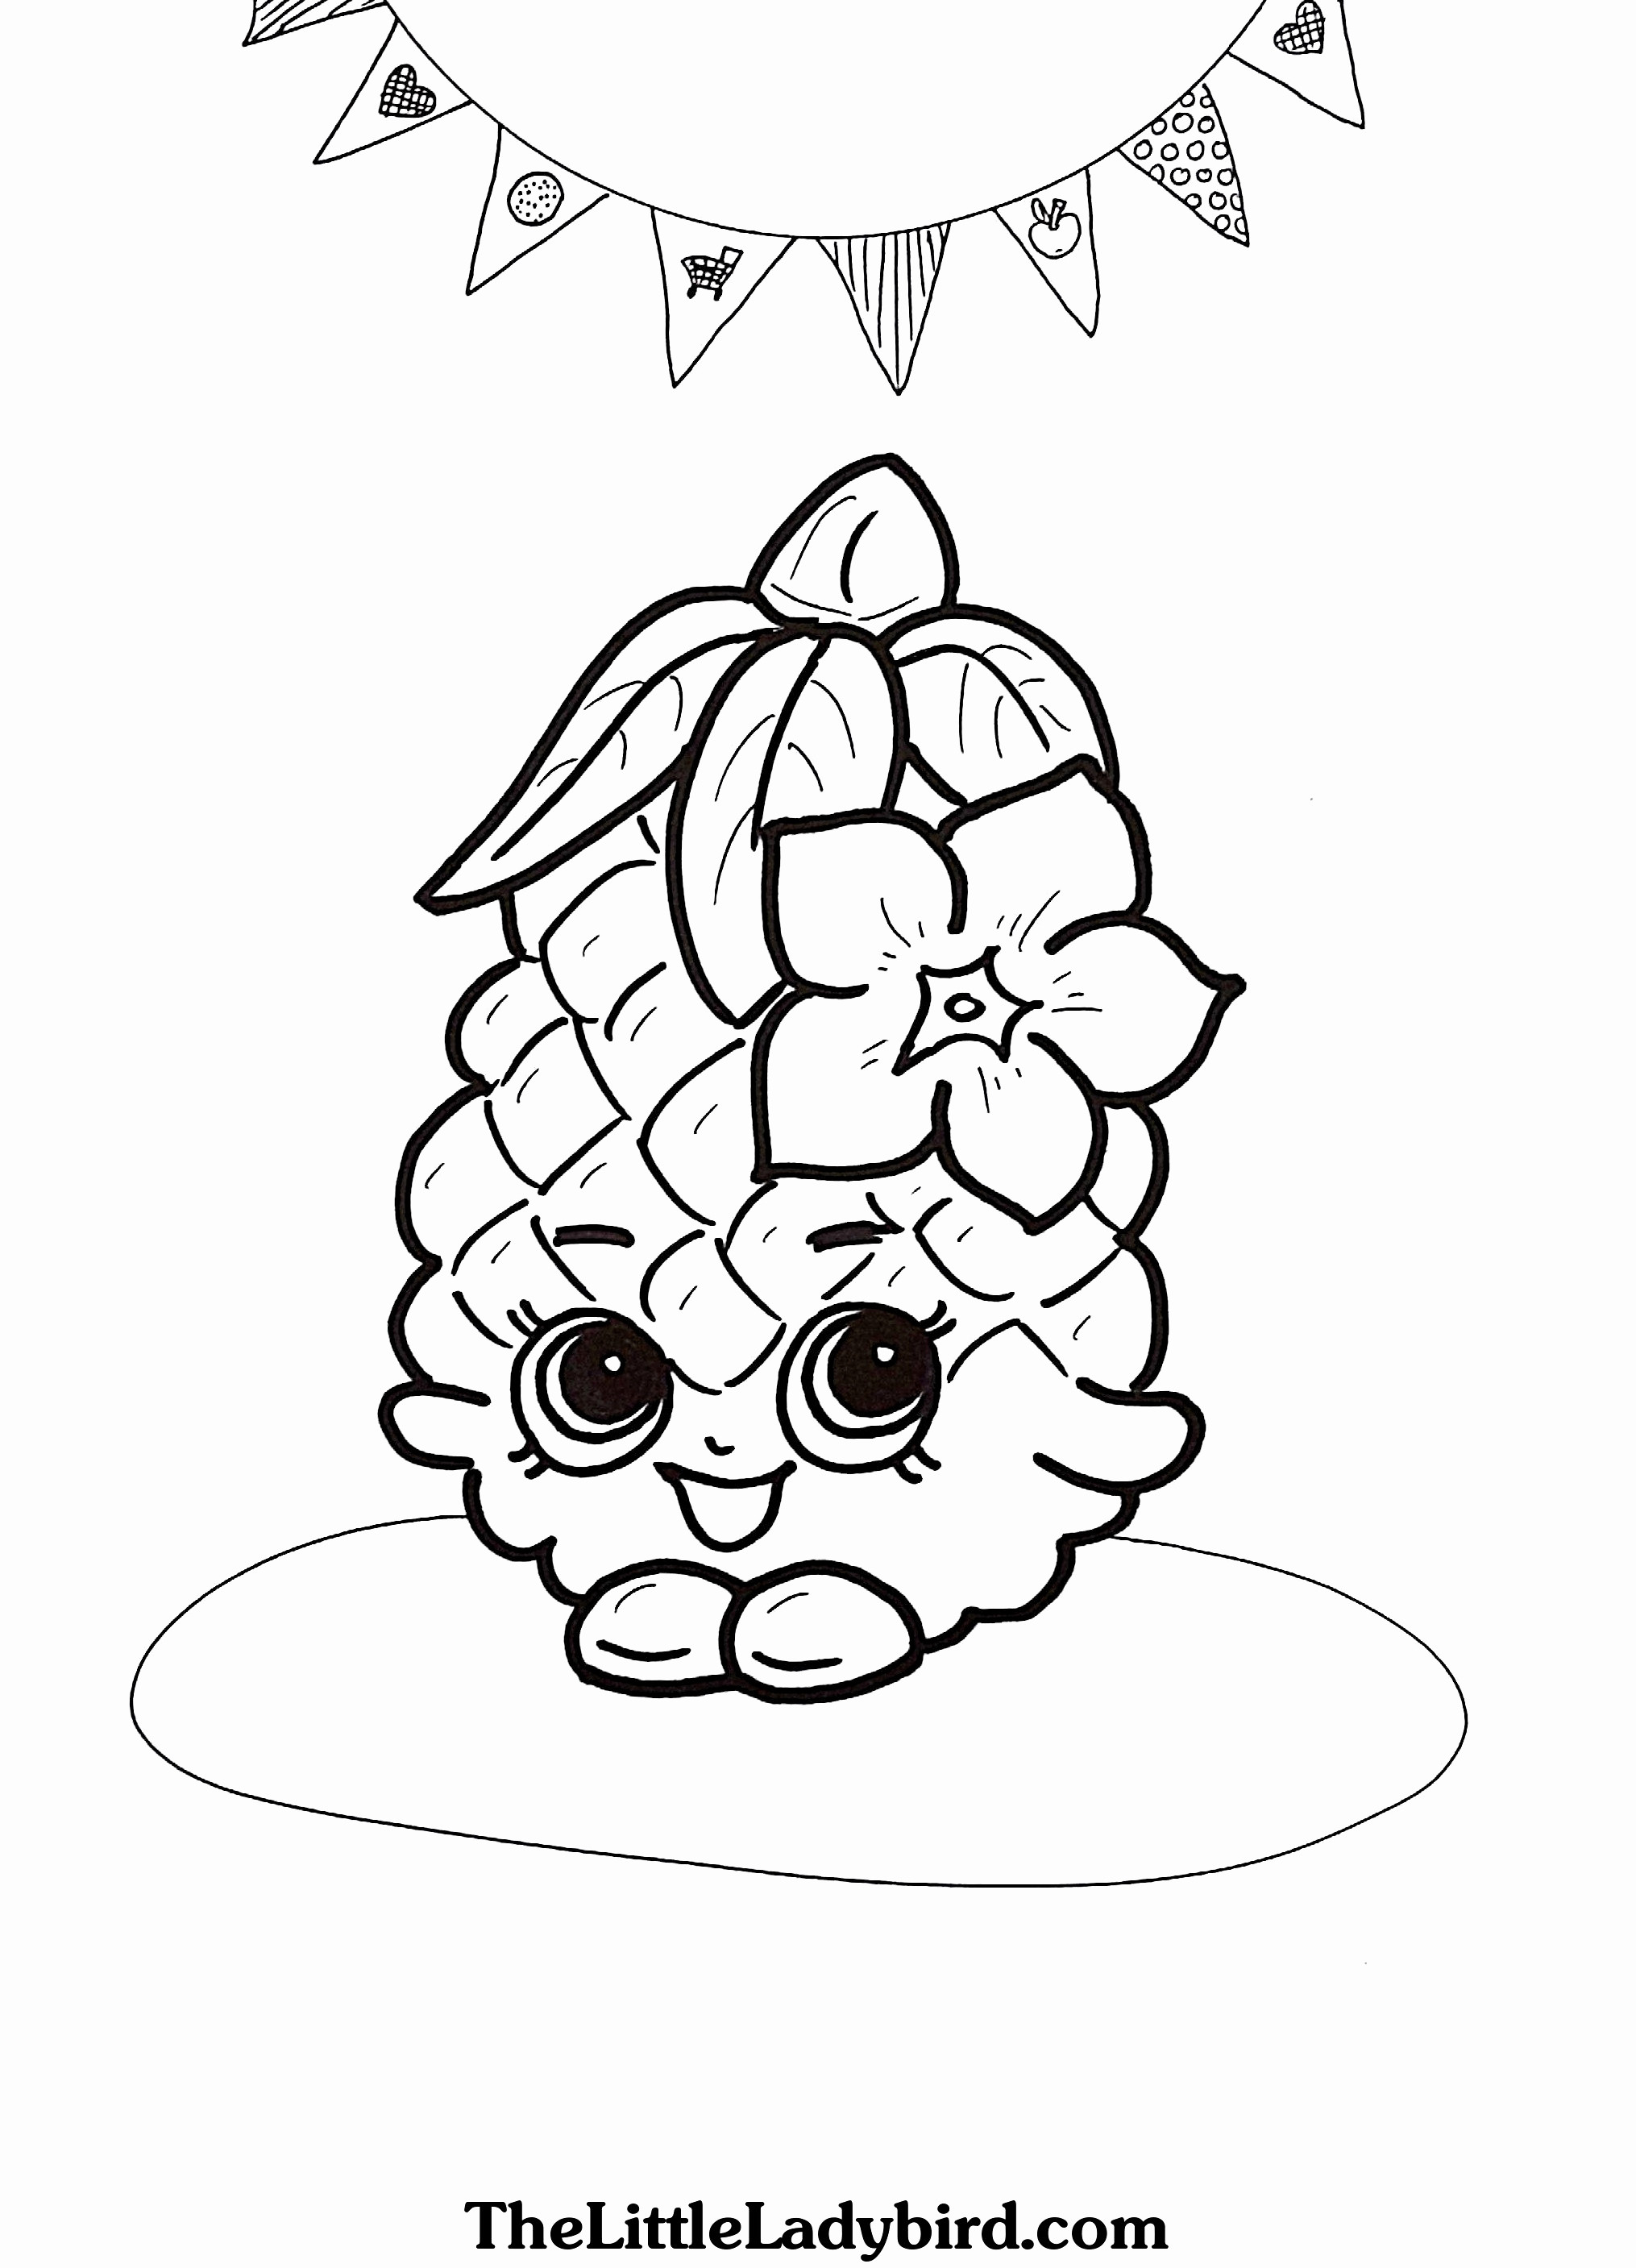 pictures of flowers in a vase of flower pictures to color elegant cool vases flower vase coloring intended for flower pictures to color elegant cool vases flower vase coloring page pages flowers in a top